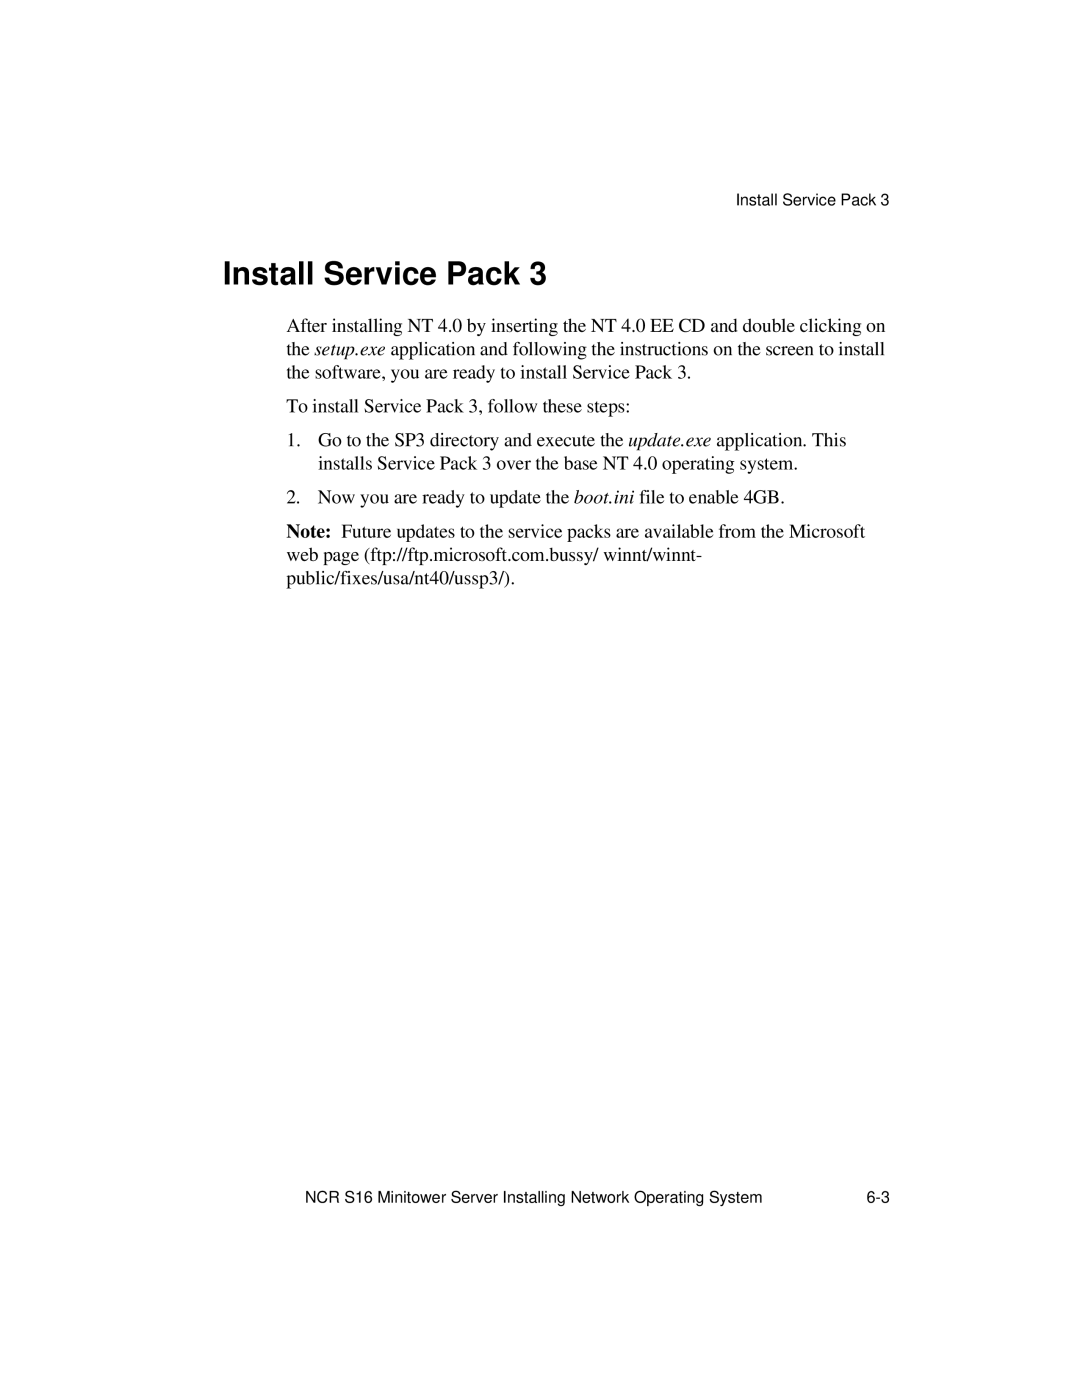 NCR S16 manual Install Service Pack 